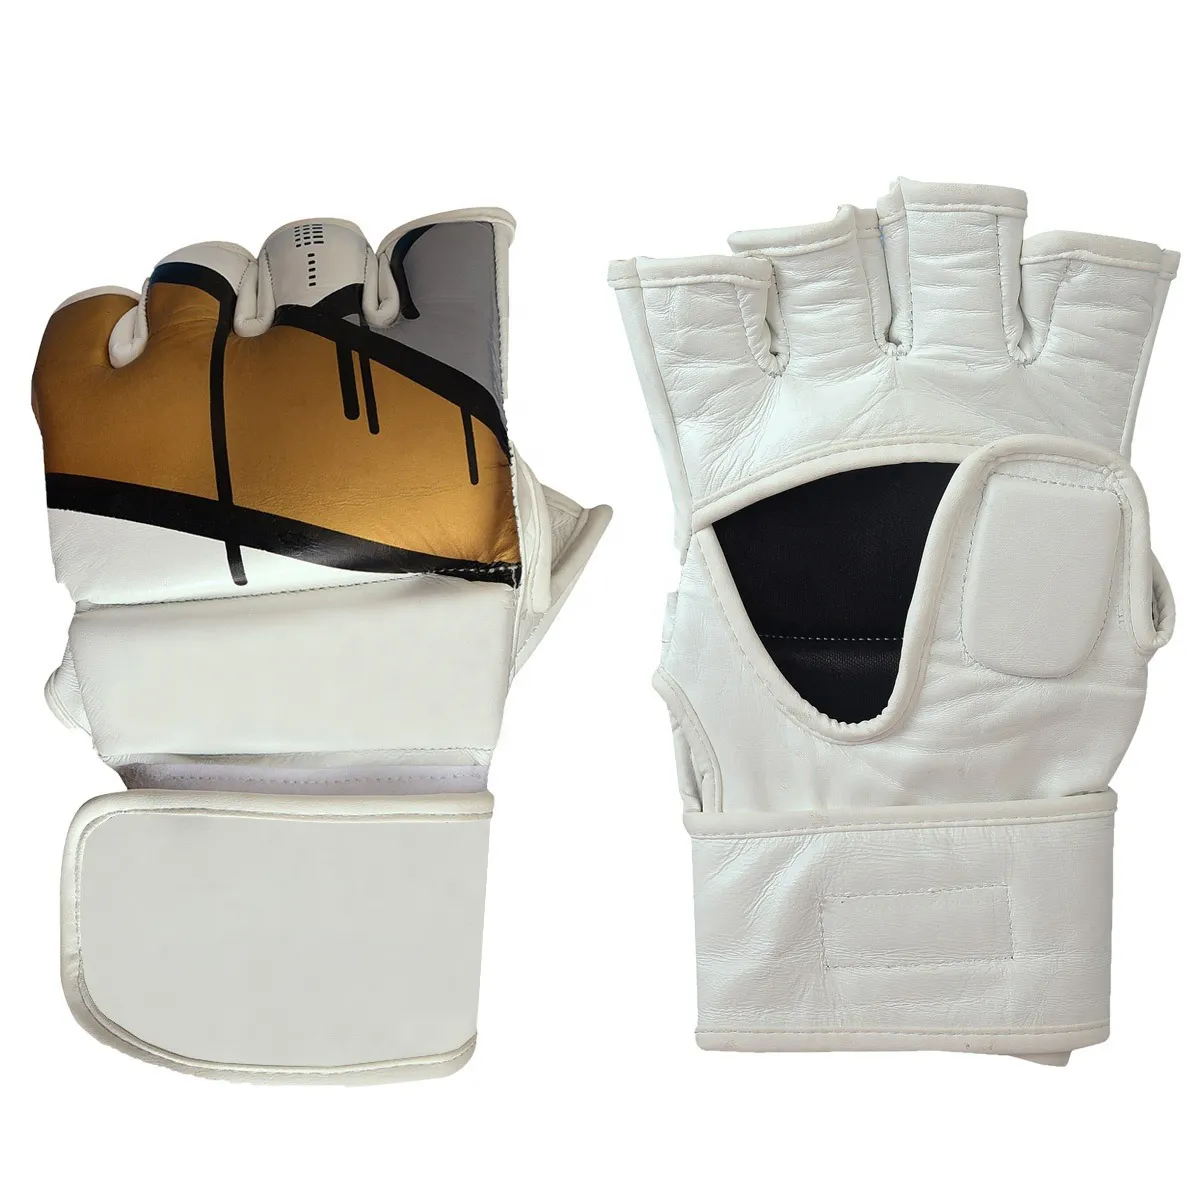 Boxing Equipment Leather Boxing Gloves Boxing Training Sparring MMA Gloves Wholesale Very Low Price Best Quality